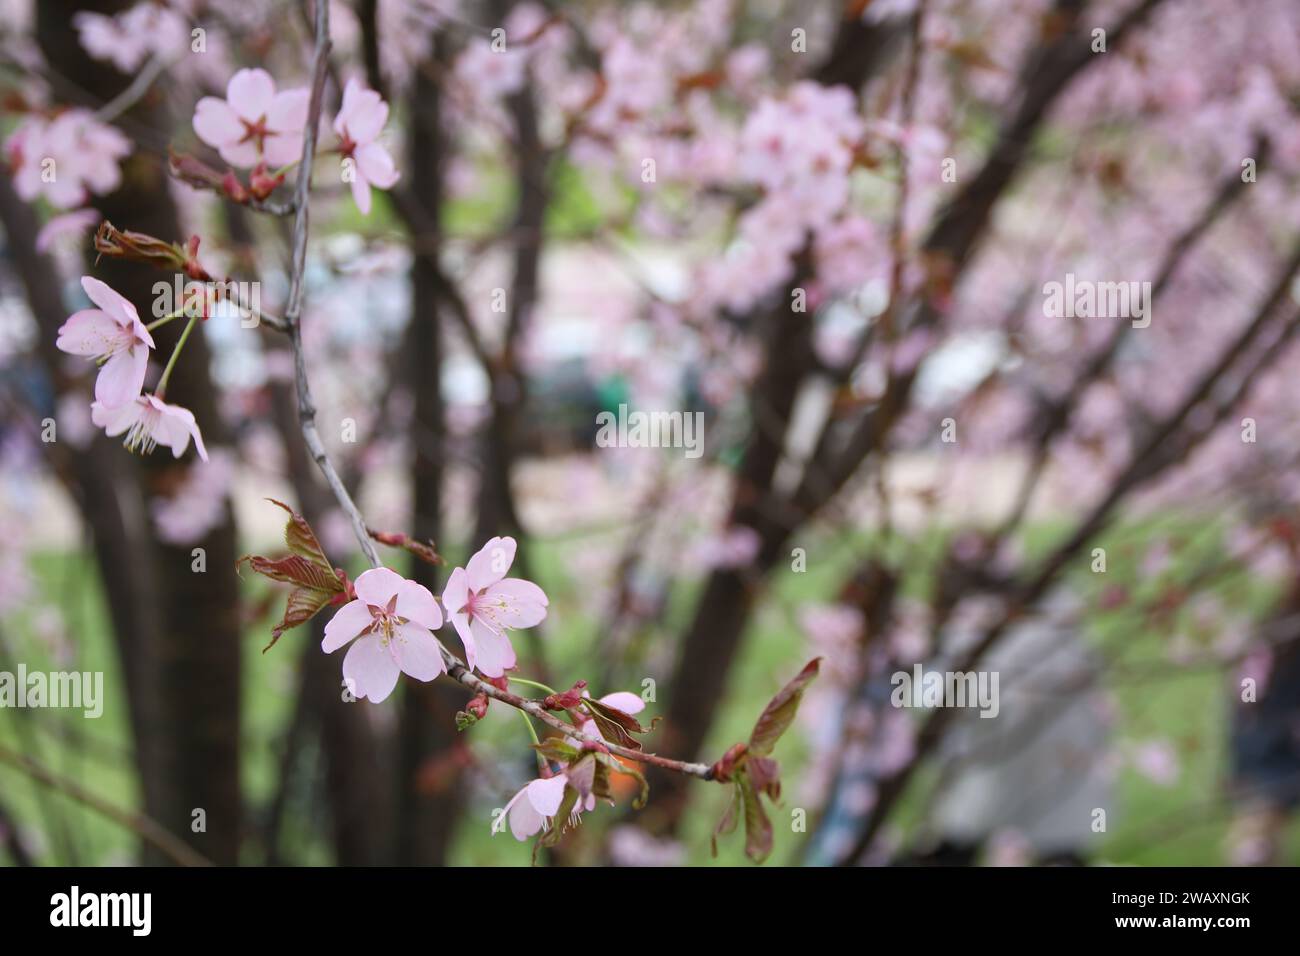 horizontal photo, the ethereal beauty of spring is captured with a blurred effect, showcasing a sakura or cherry tree in full bloom. t focus on cherry Stock Photo